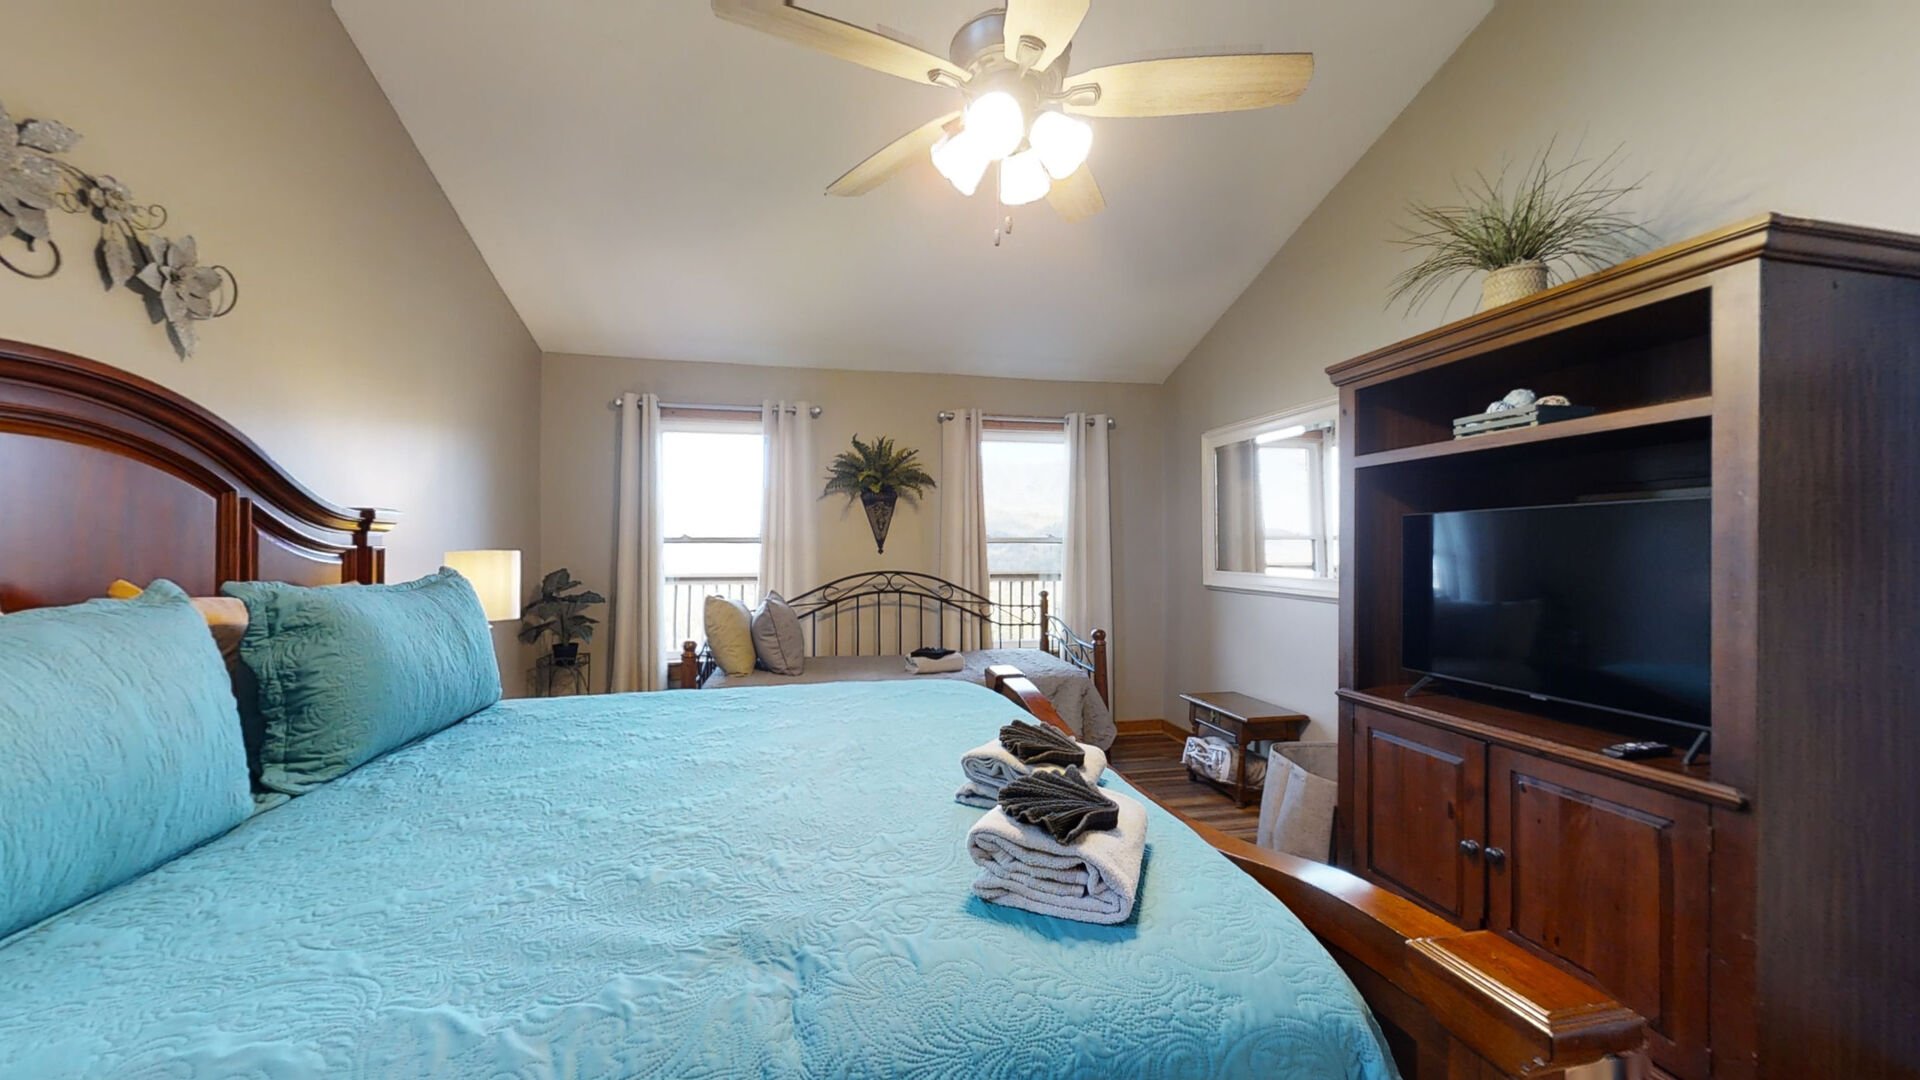 You'll have ample room to hang your clothes in the closet of this Master Bedroom #1. It has a big comfortable king sized bed, a comfortable twin bed, flat screen TV with remote, a ceiling fan and an air cleaner